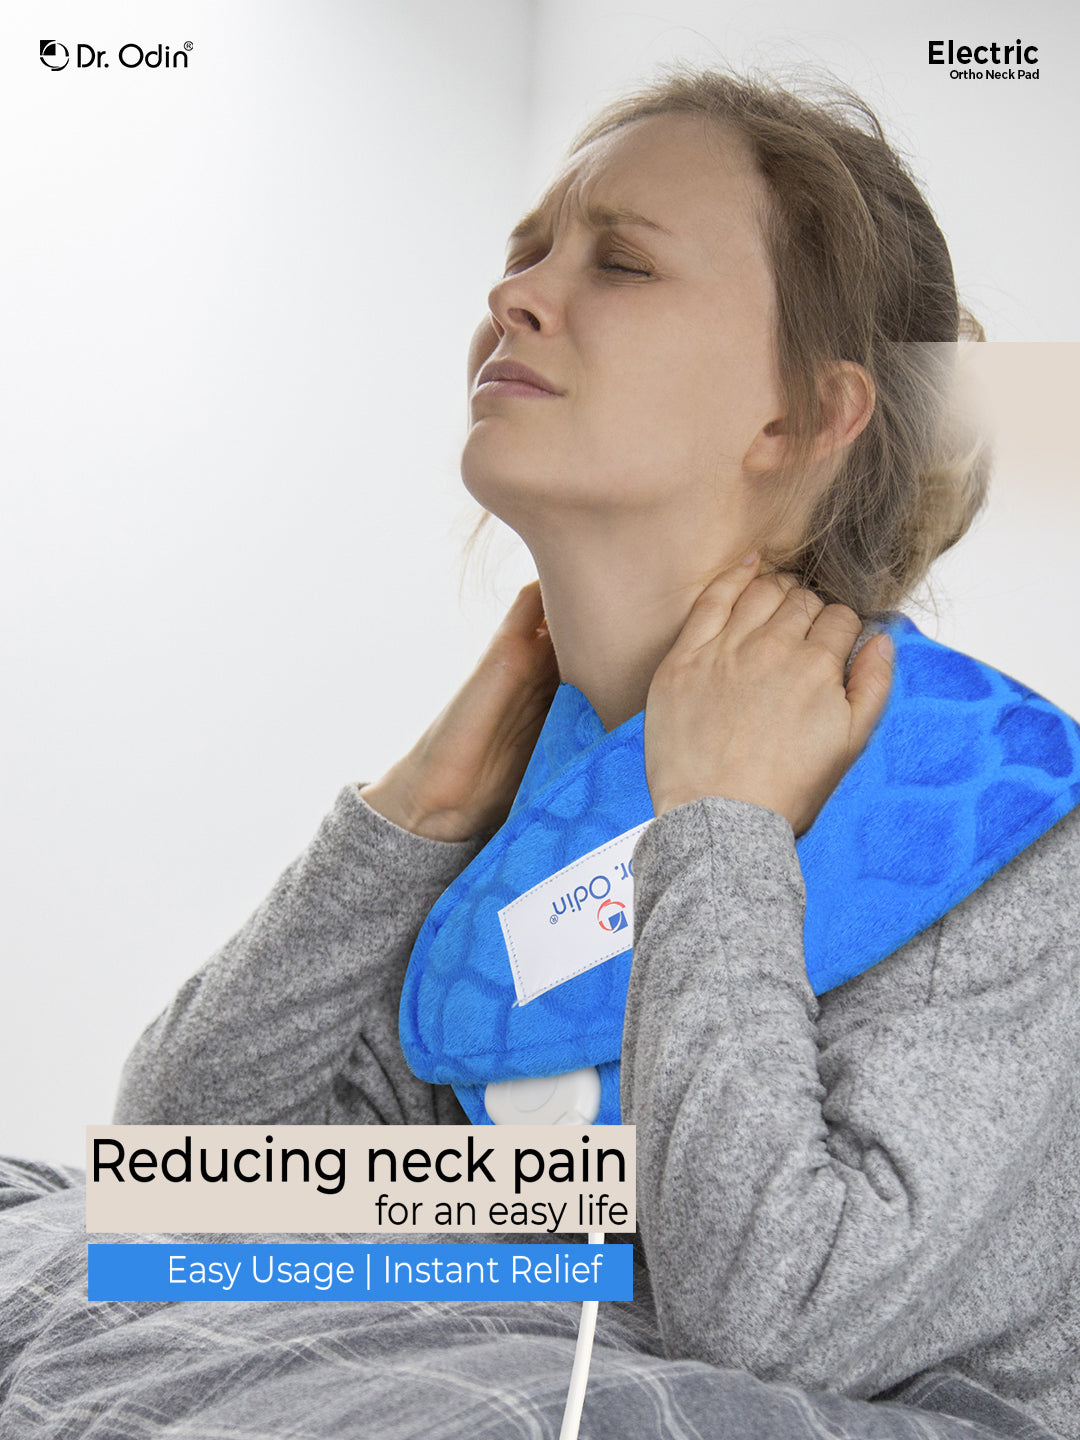 Electric Ortho Neck Pad